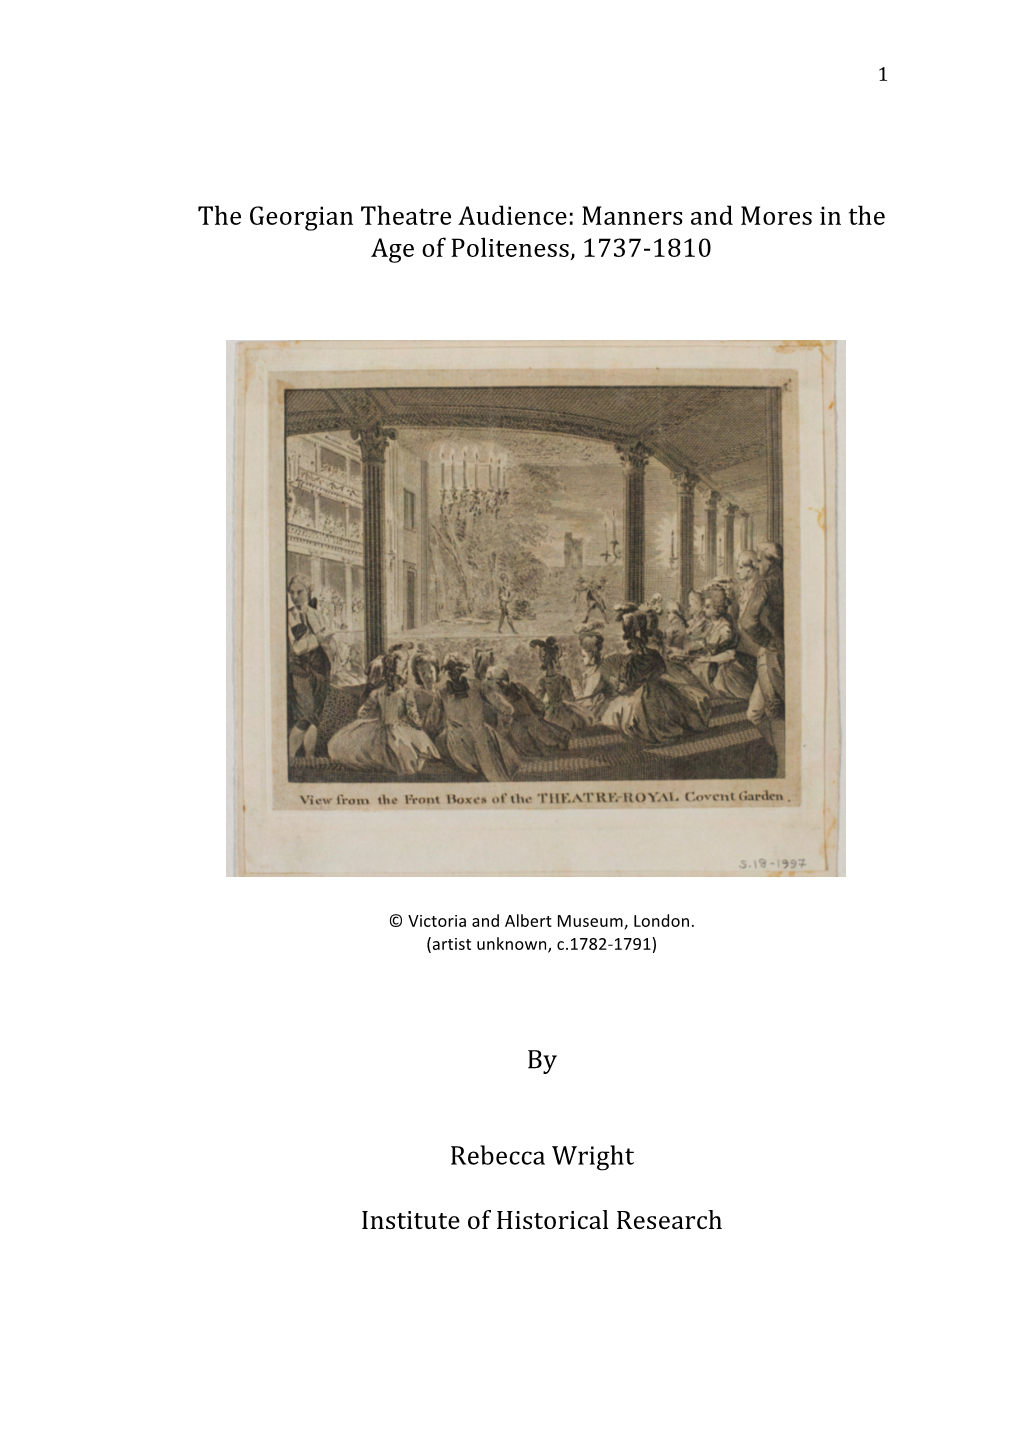 The Georgian Theatre Audience: Manners and Mores in the Age of Politeness, 1737-1810